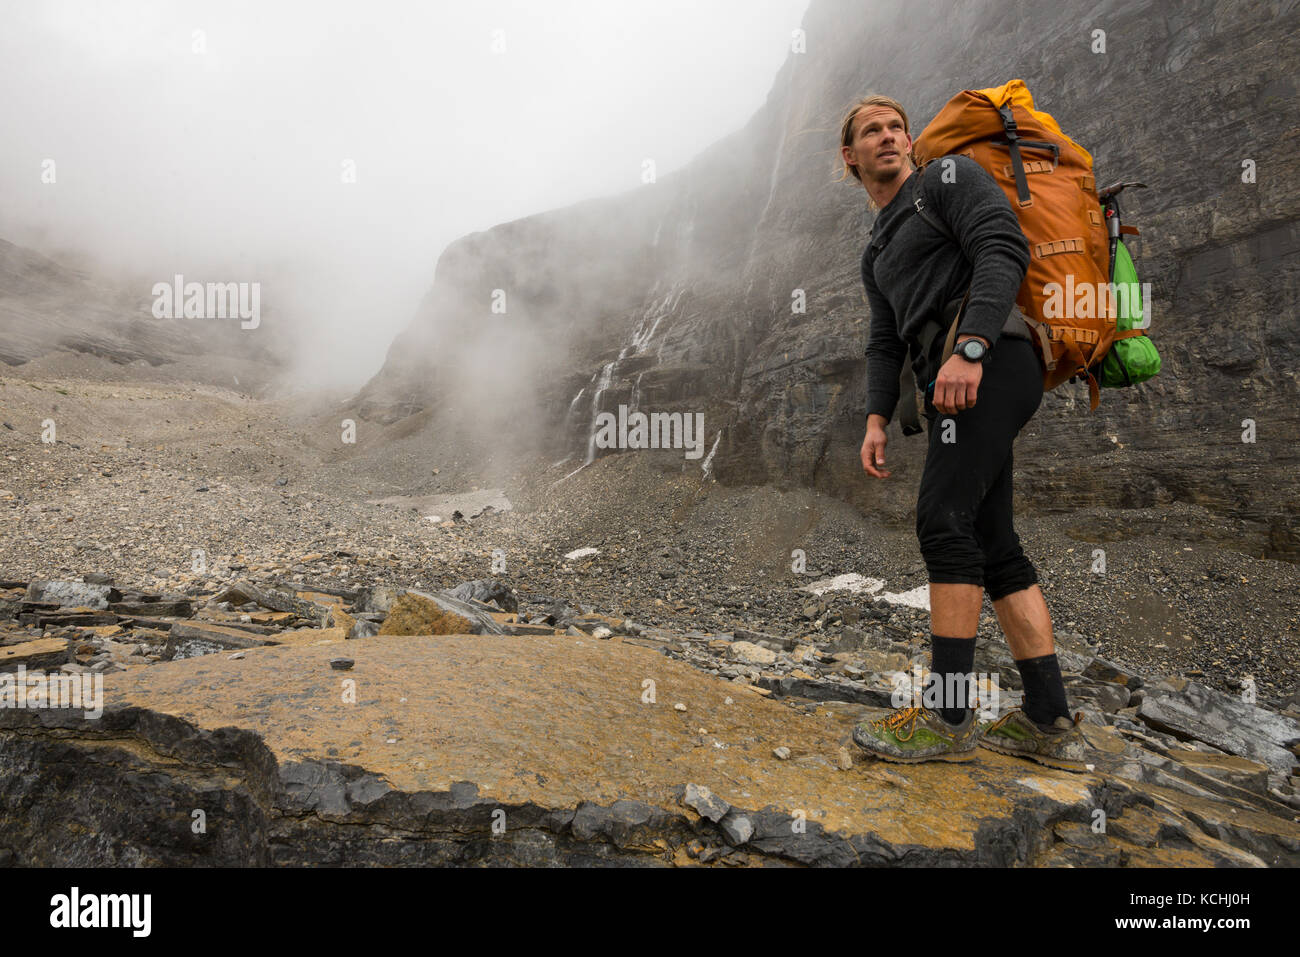 A hiker in alpine talus on the lower flanks of Mount Assiniboine, British Columbia Stock Photo